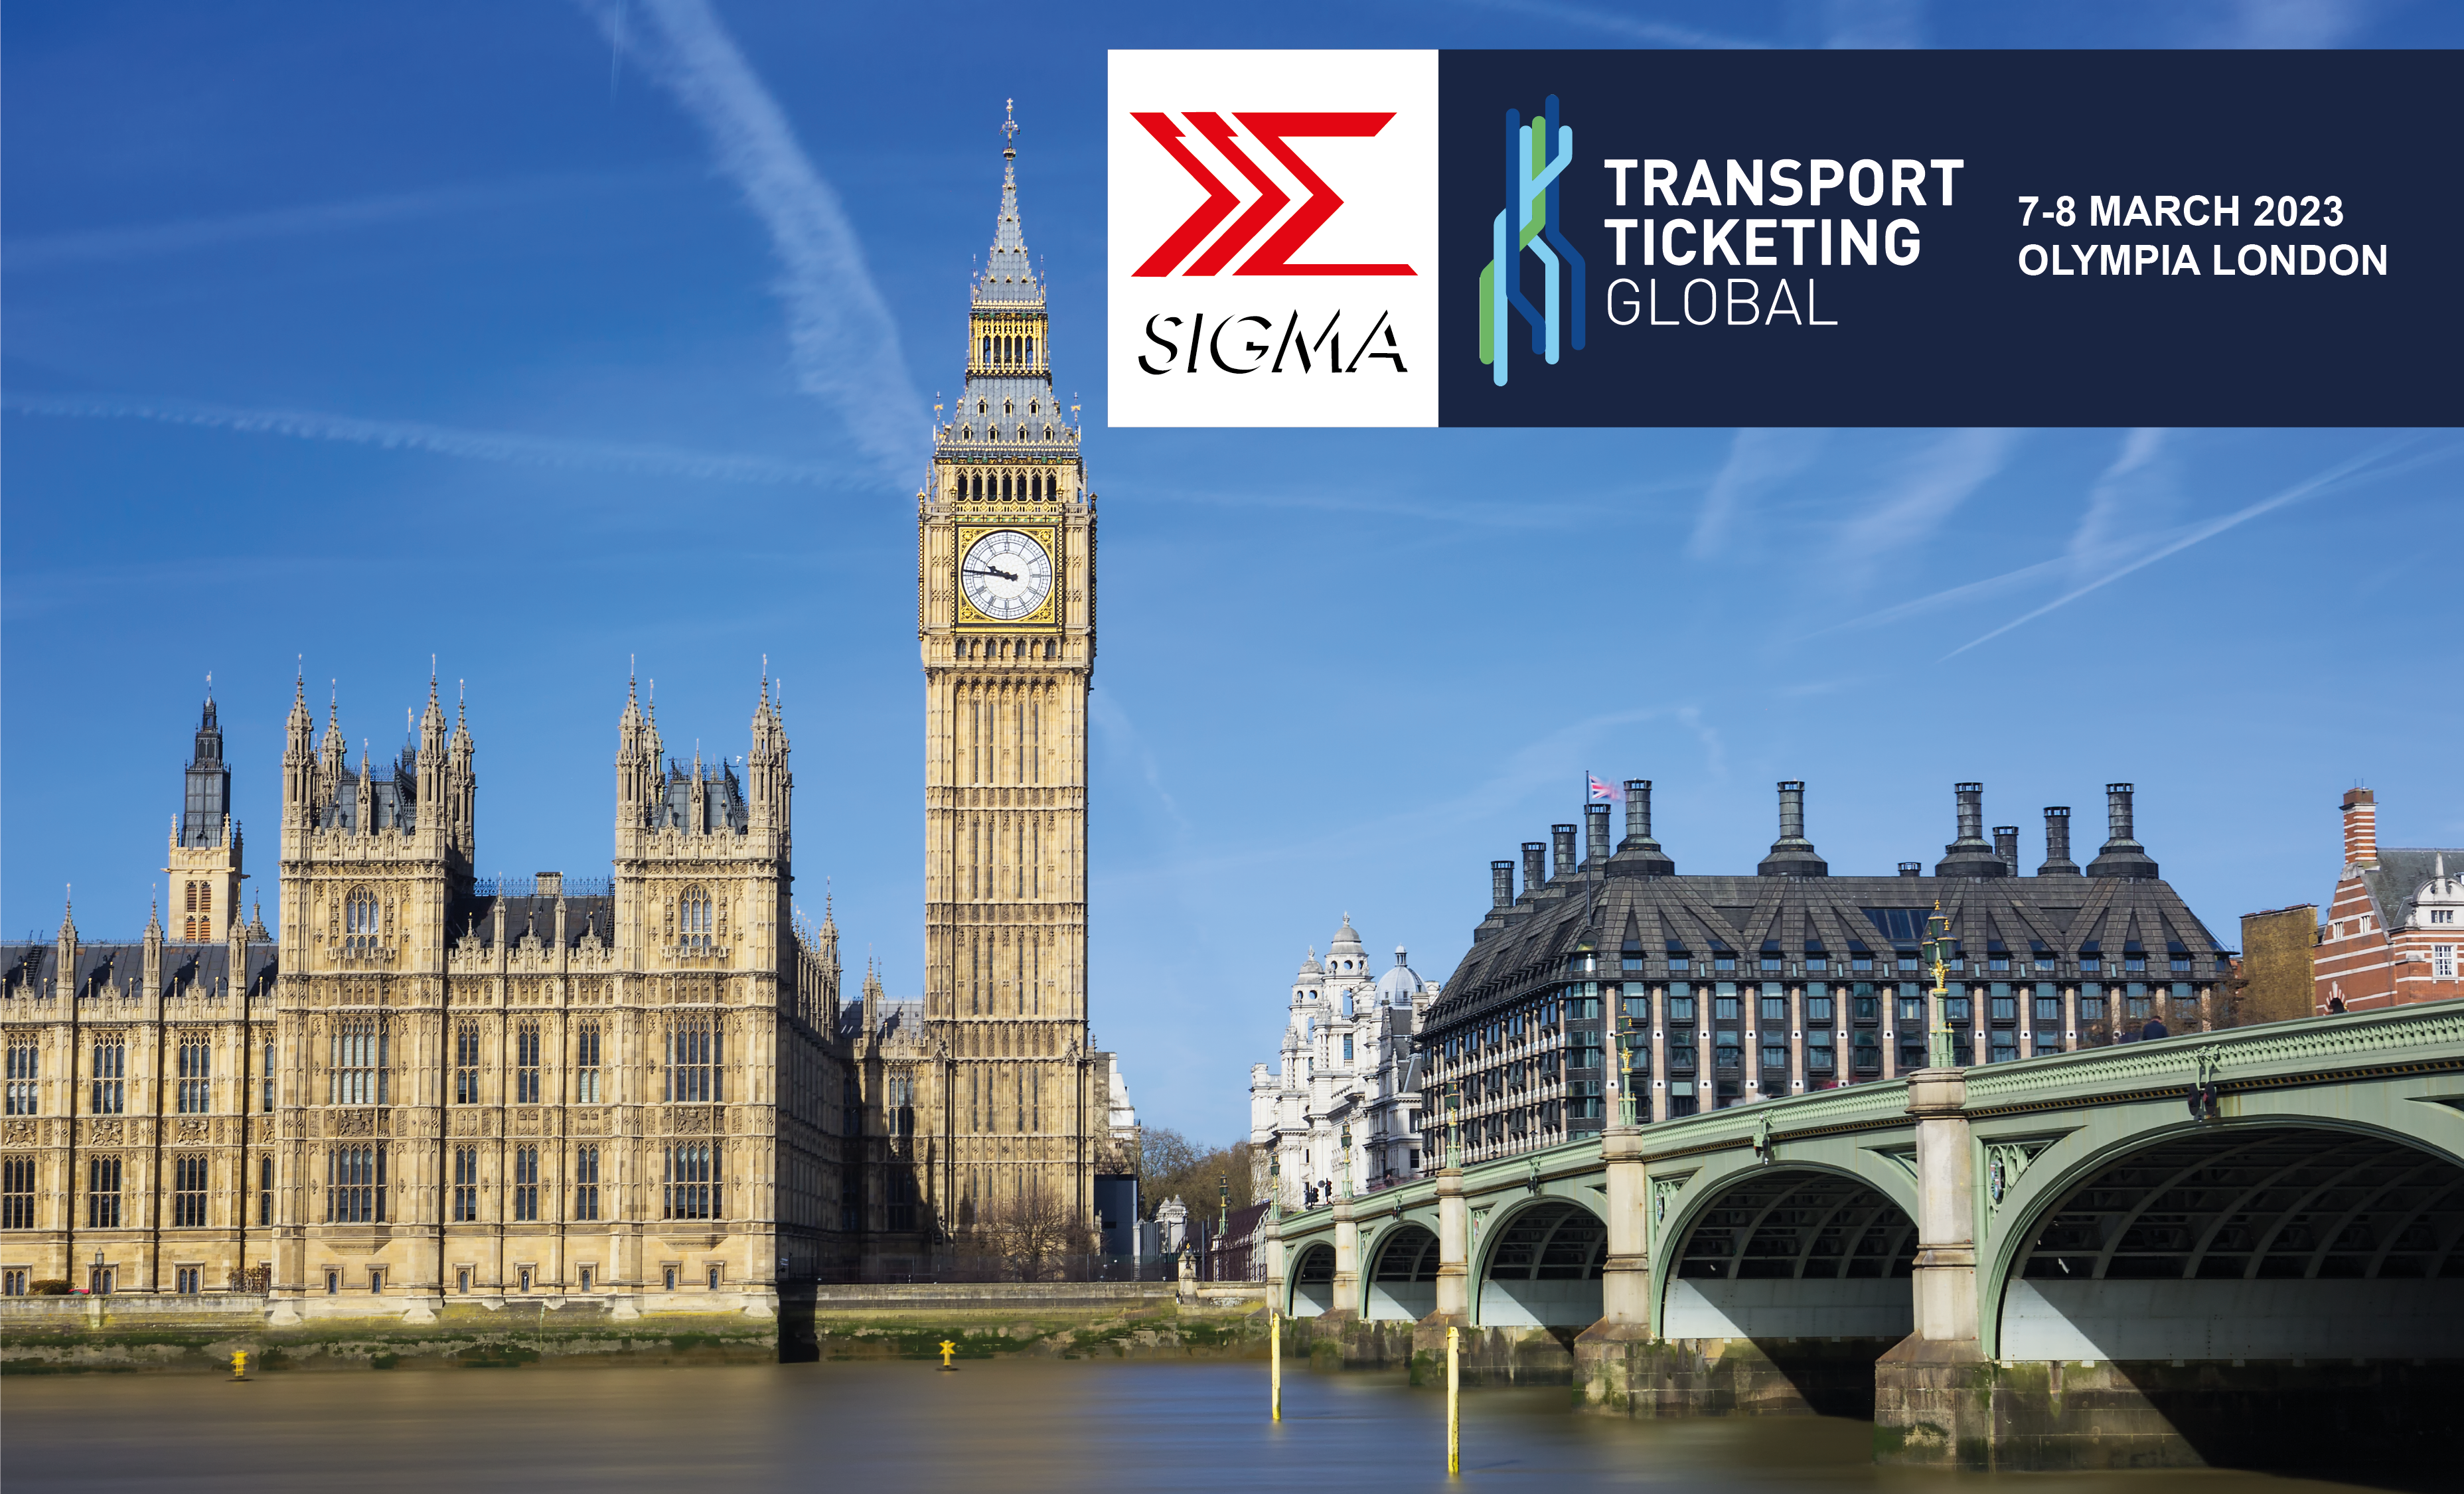 <em>SIGMA Spa will once again exhibit at Transport Ticketing Global in London, the most important event in the Transport Ticketing sector.</em>“>
                                        <a href=